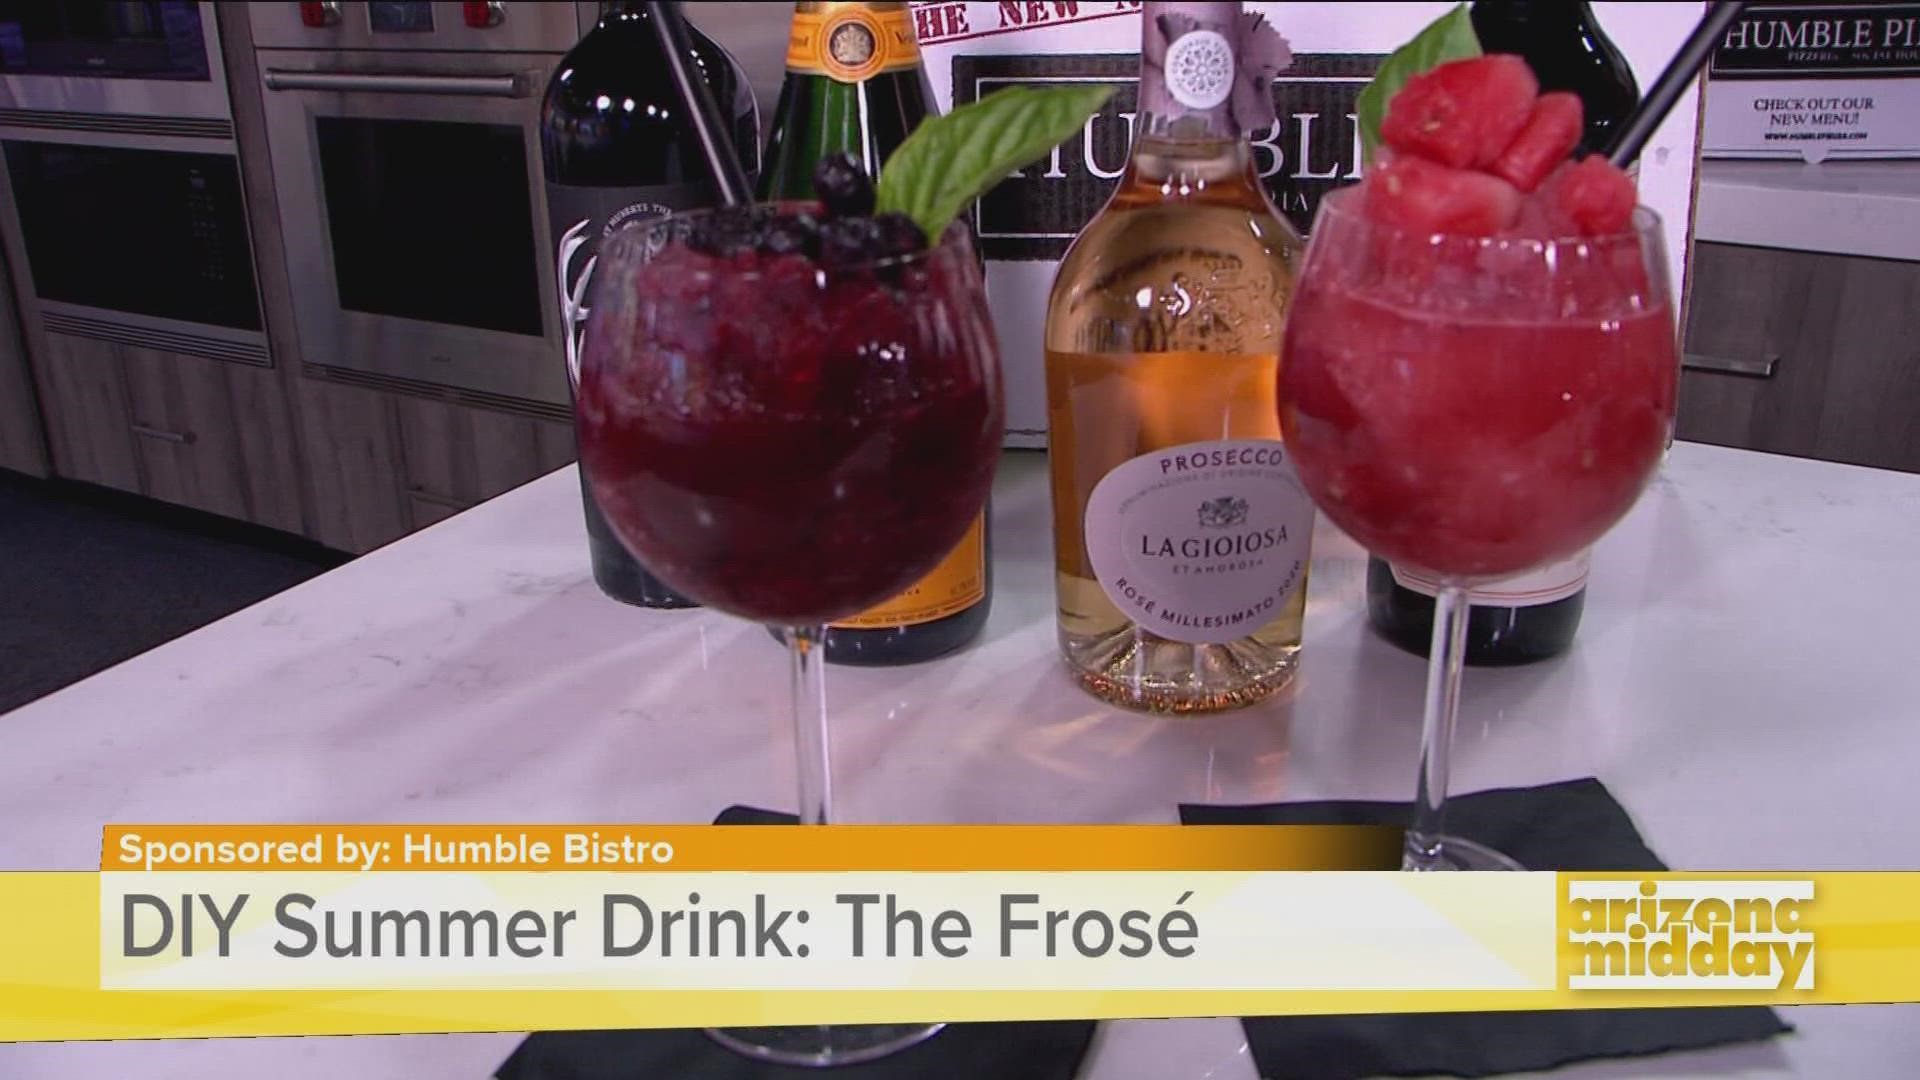 Chef Jorge Gomez, from Humble Bistro, shares his tricks to a refreshing frosé perfect for summer plus the eats to pair it with!